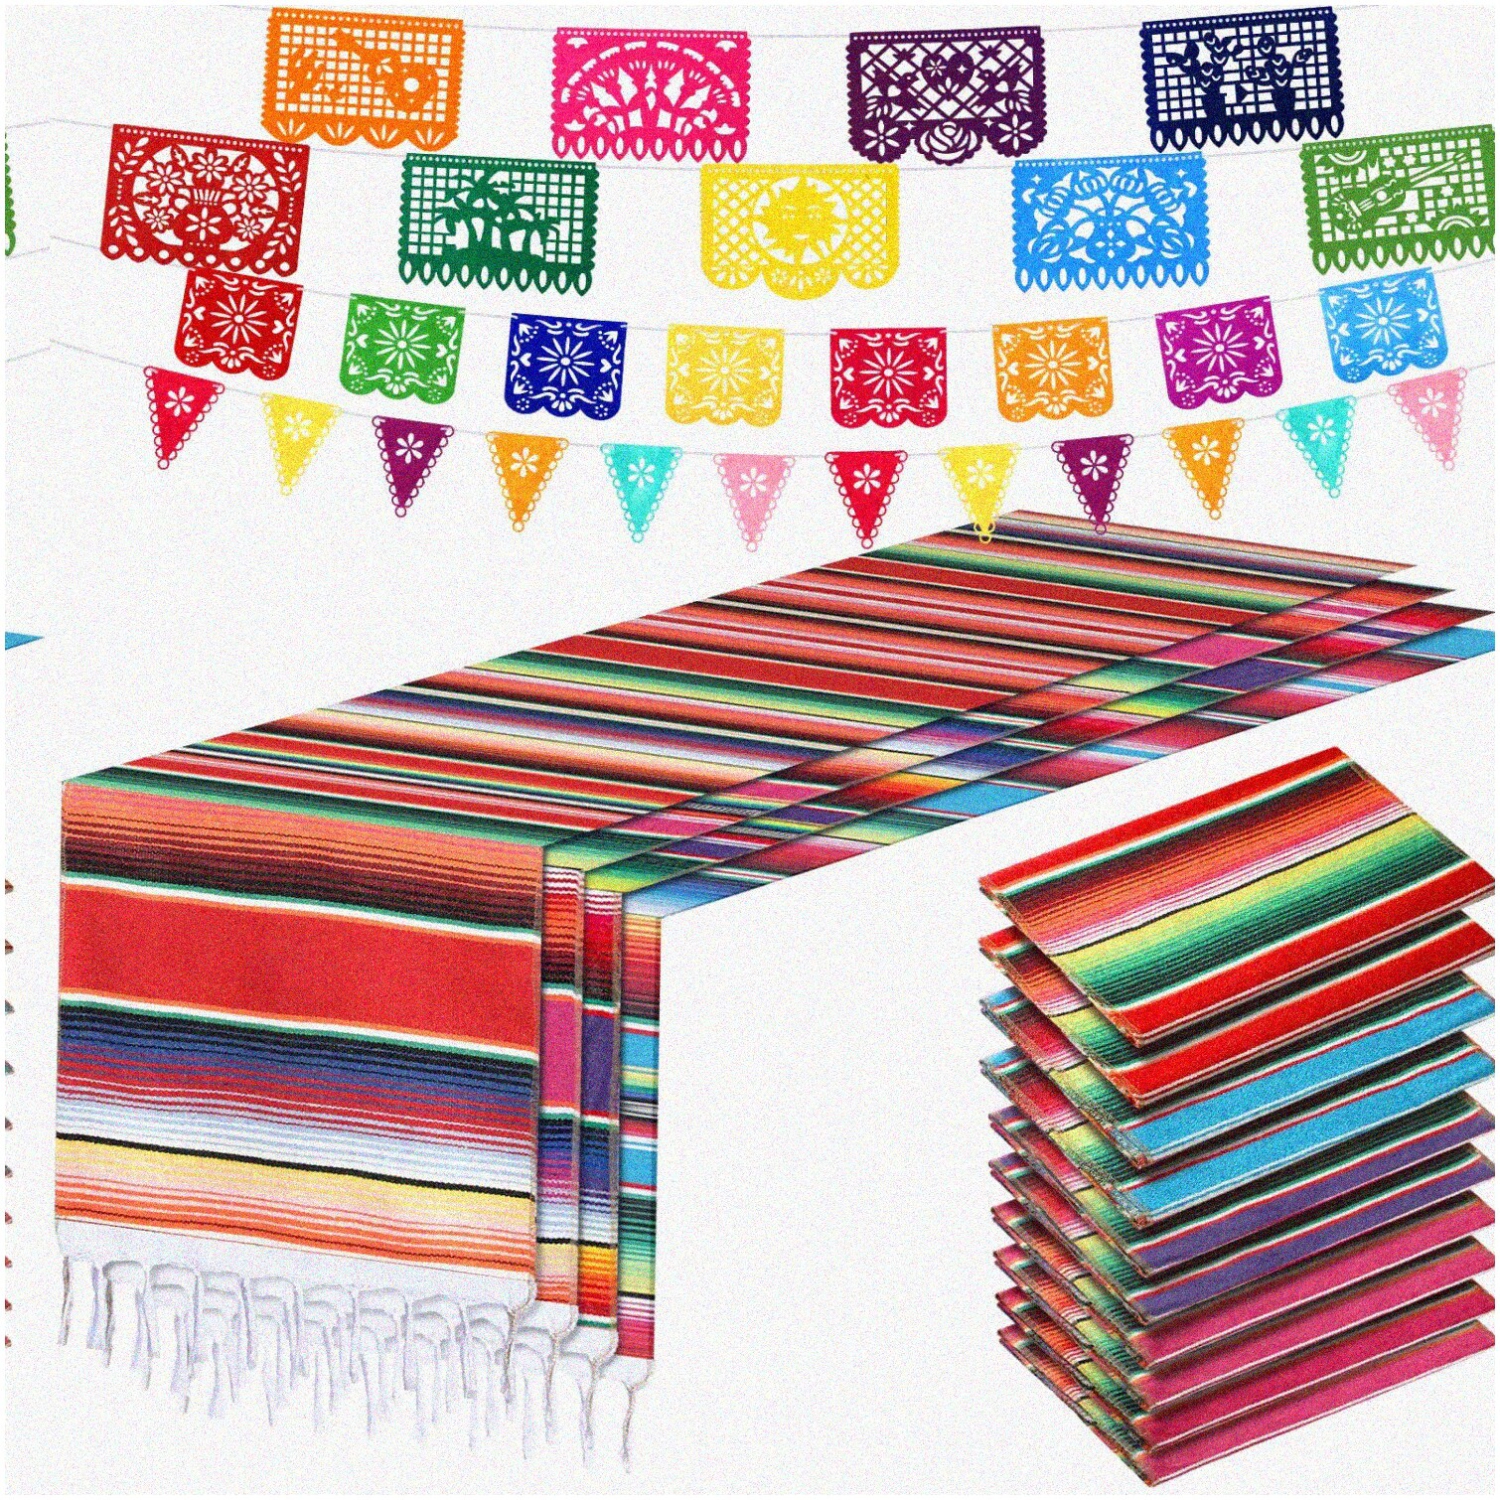 Fiesta Fiesta: Mexican Serape Table Runners & Papel Picado Banner Set - 10 Pack 14x84in, 29 Pcs Colorful Bunting for Theme Party - Rose Red, Purple, Blue, Red.